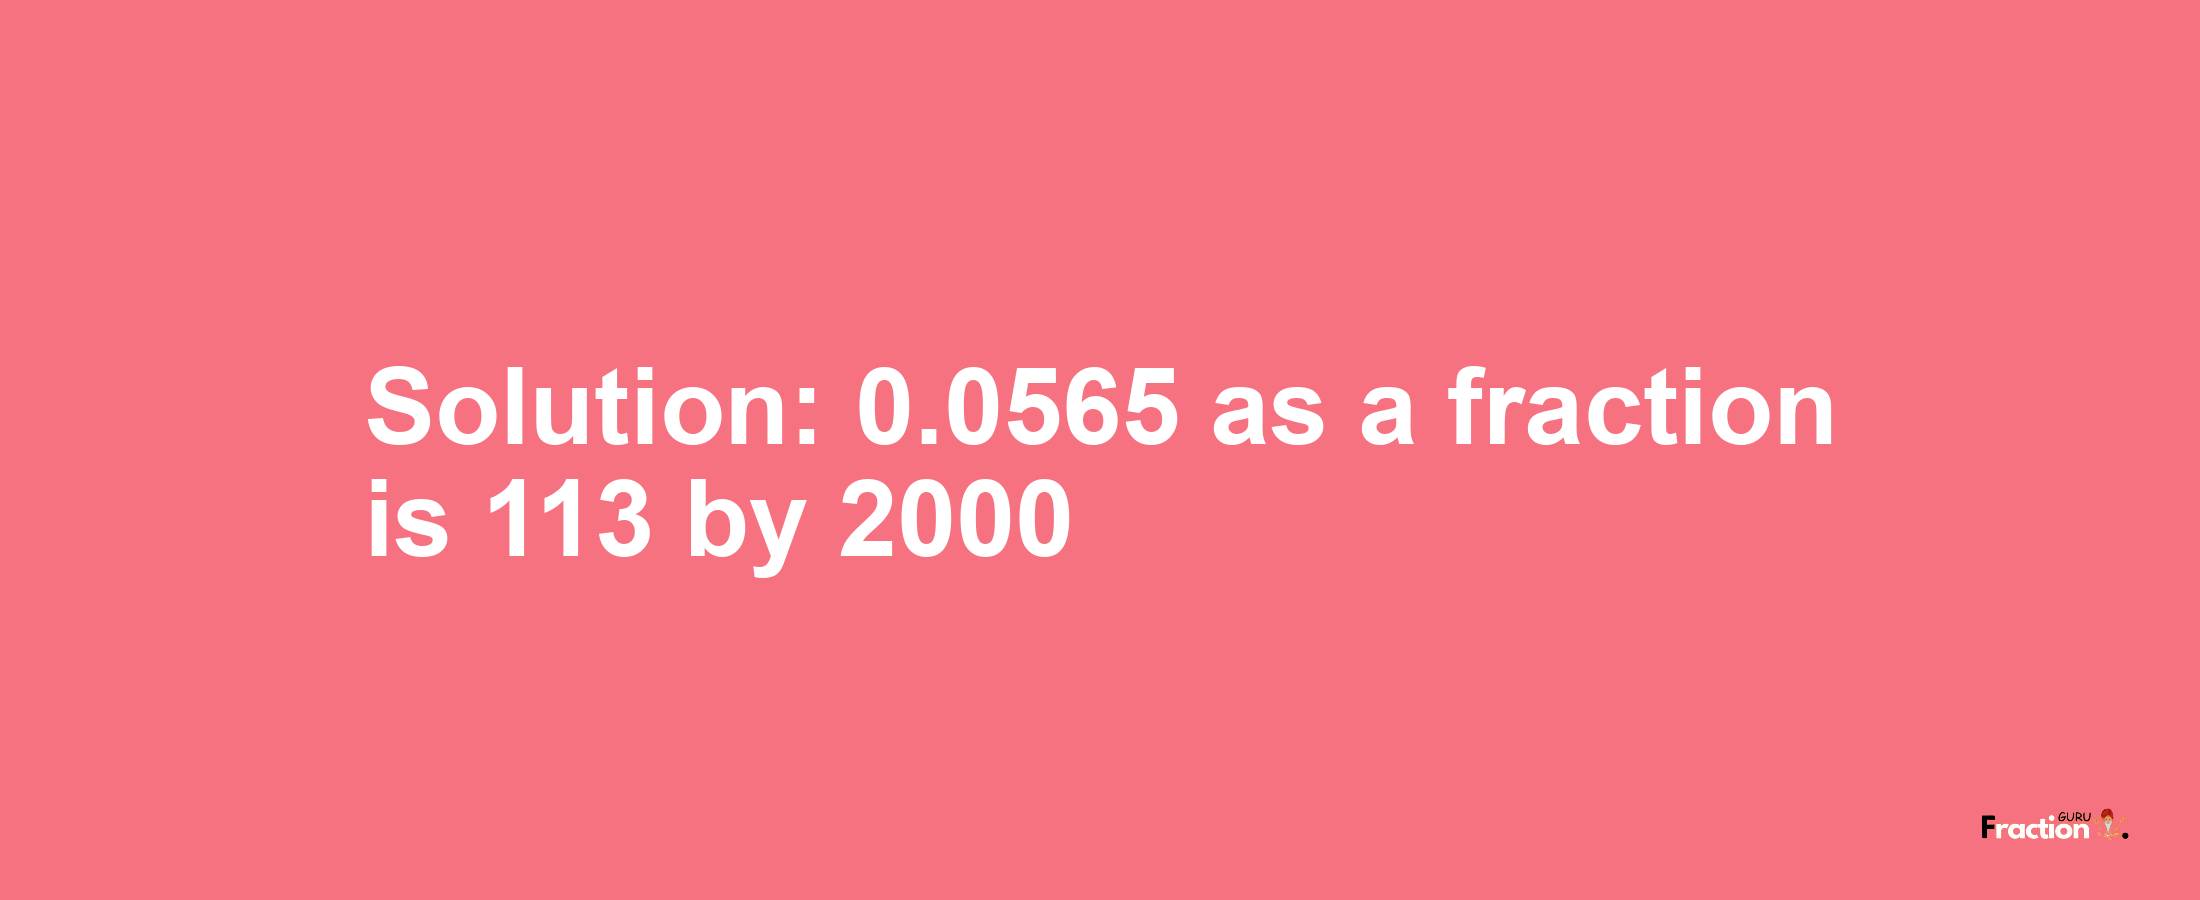 Solution:0.0565 as a fraction is 113/2000